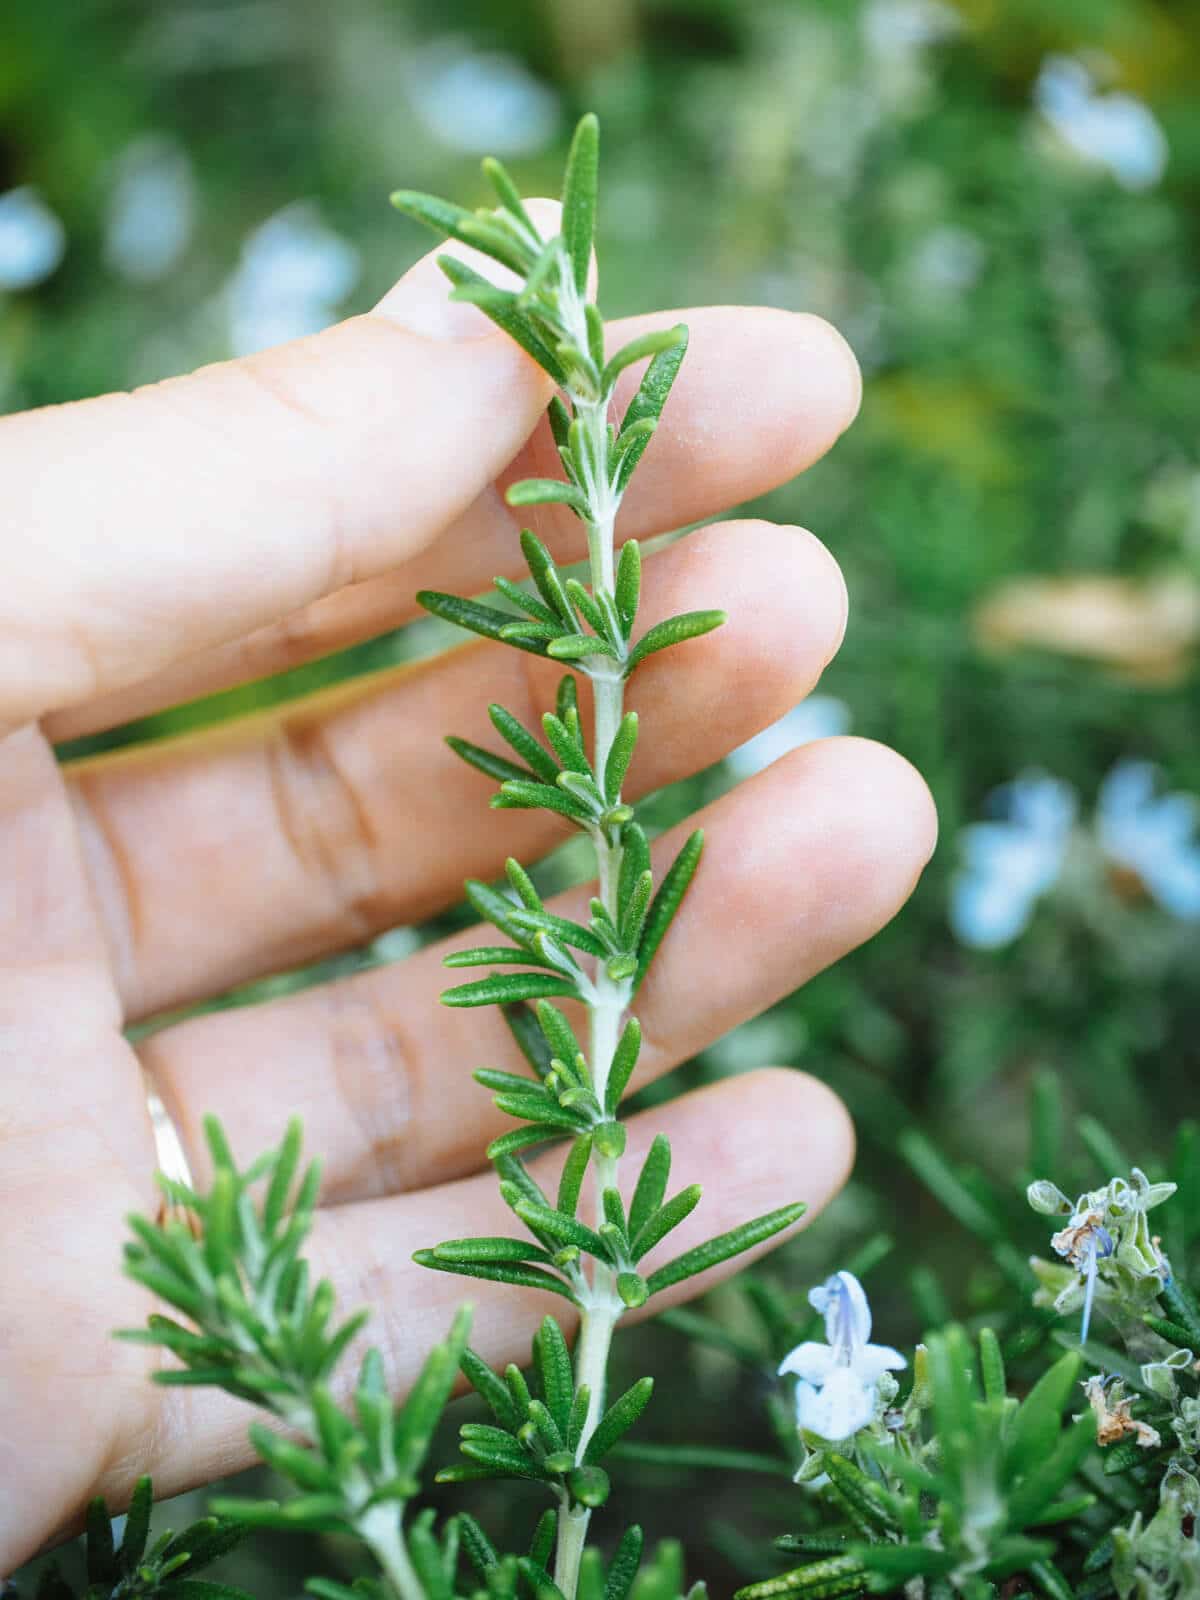 Rub fresh rosemary leaves to release their scent or diffuse rosemary essential oil to increase concentration and improve performance